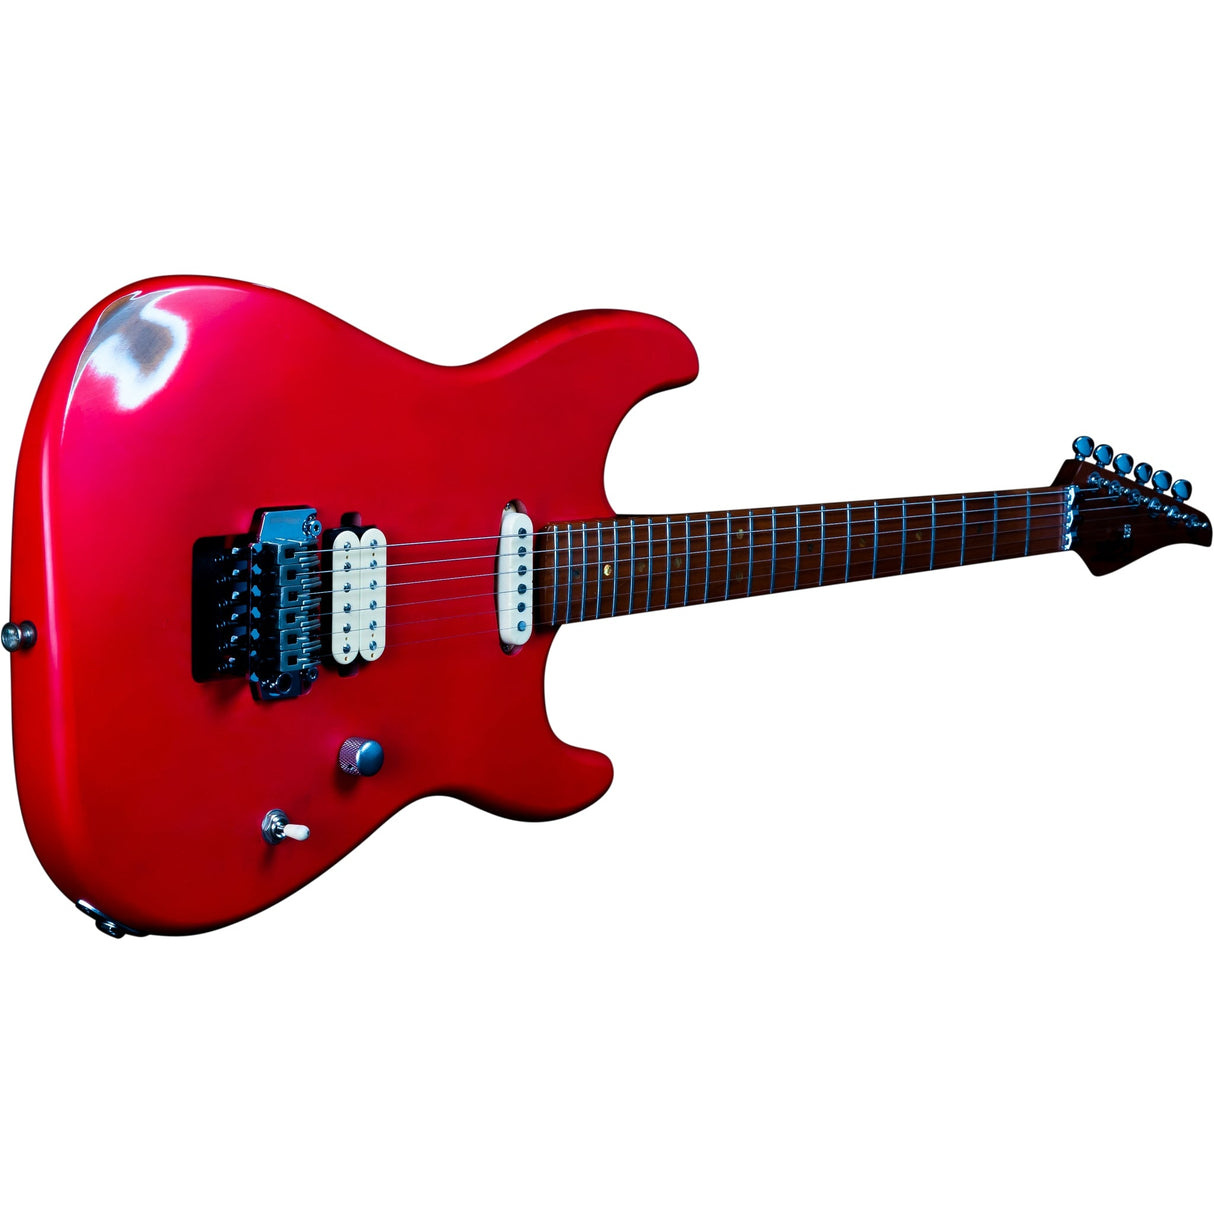 Jet Guitars JS-850 Relic Canadian Maple Electric Guitar with HS Alnico V Pickup, Red Distressed